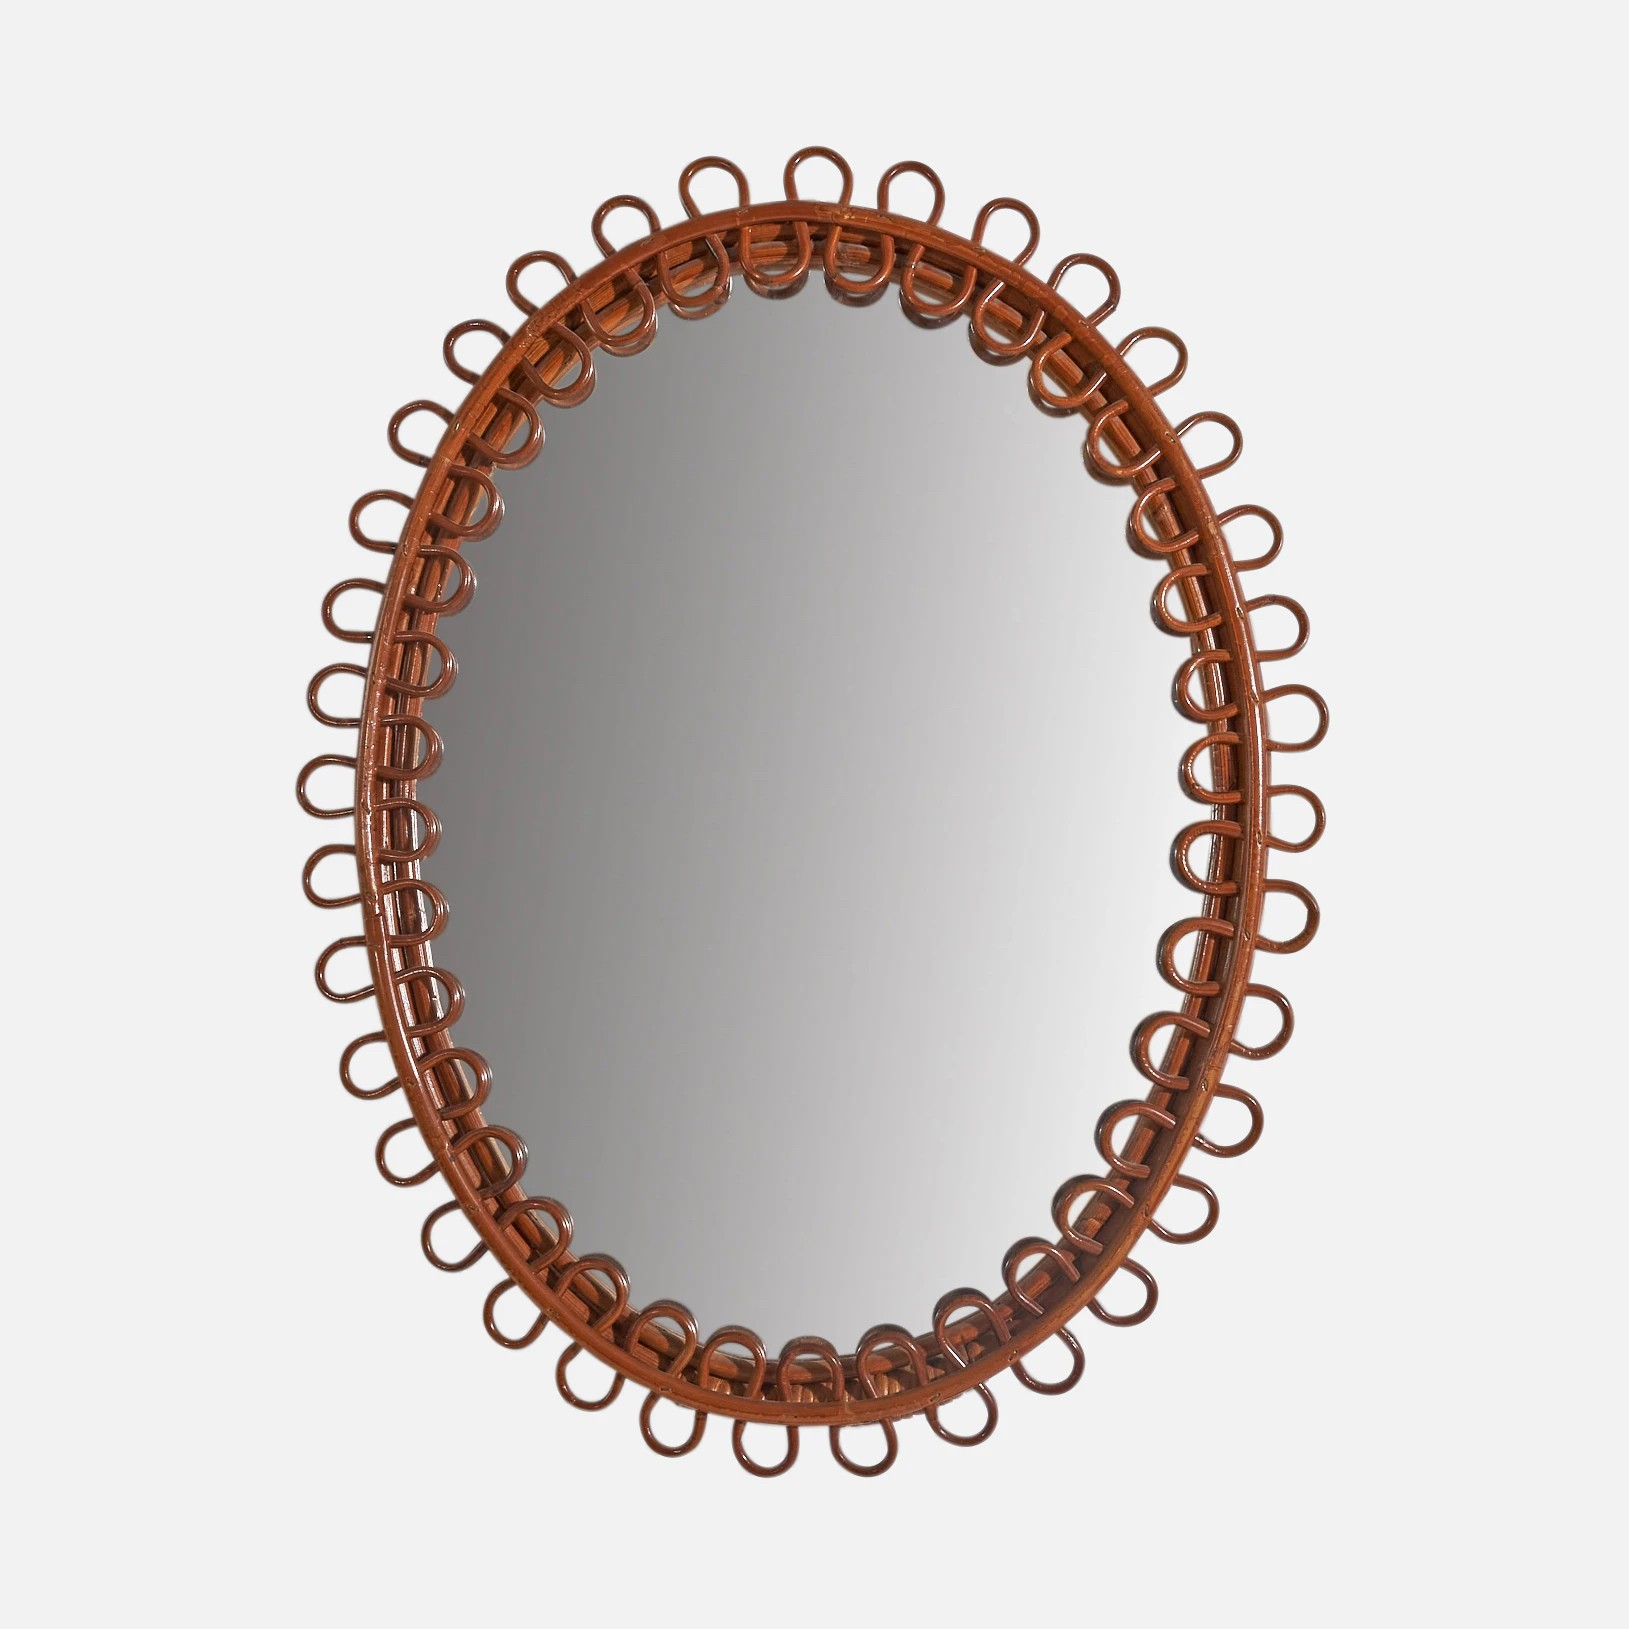 The image of an Italian Oval Rattan Wall Mirror product